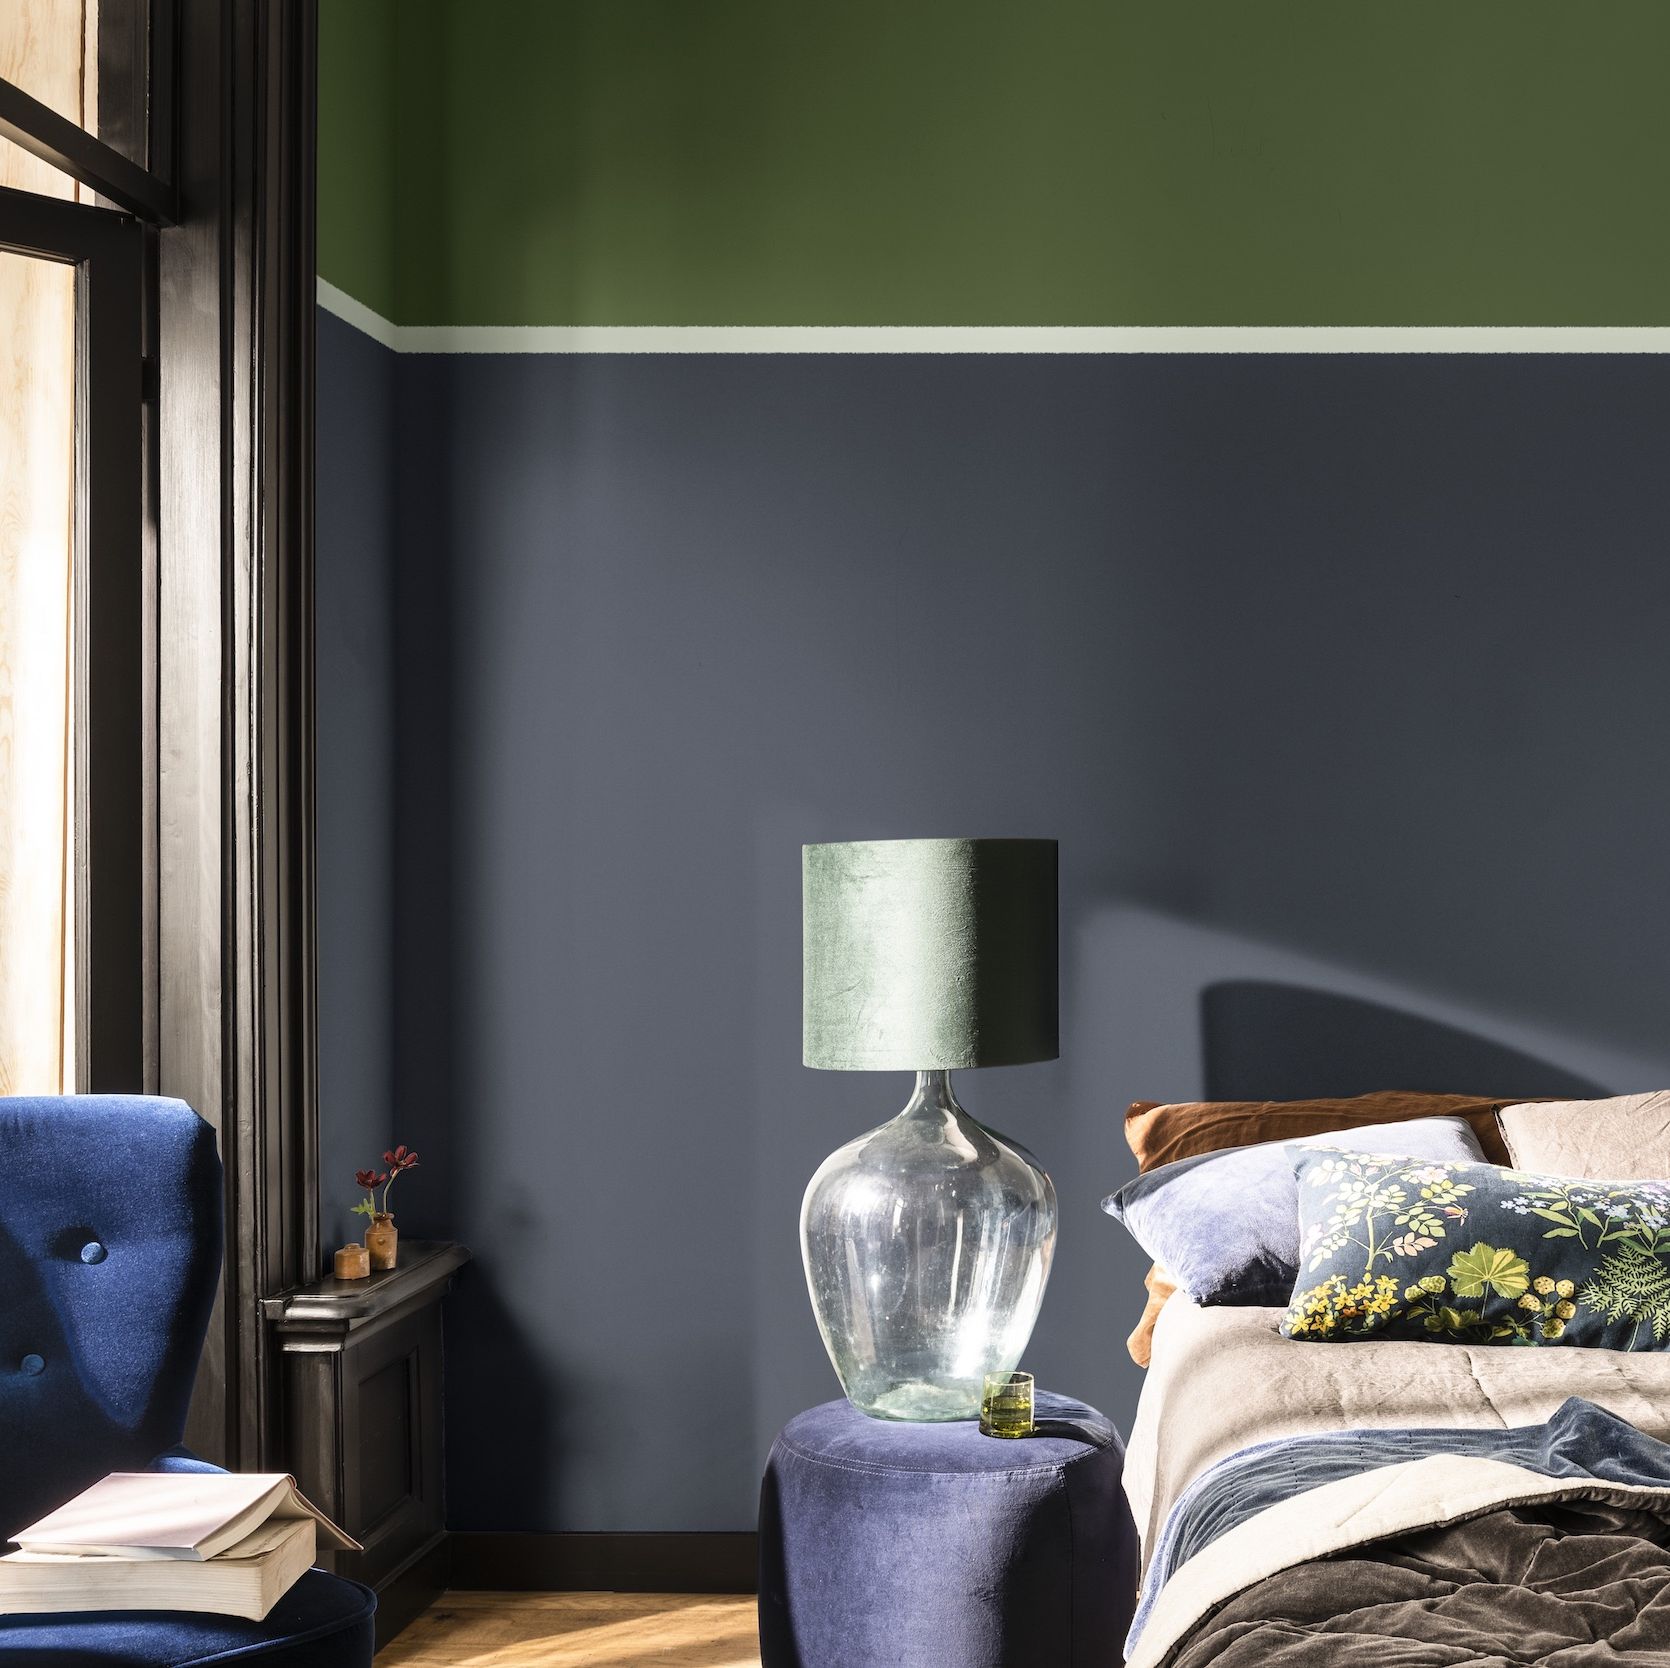 blue and green bedroom scheme – dulux colour of the year 2020 tranquil dawn creativity colour palette